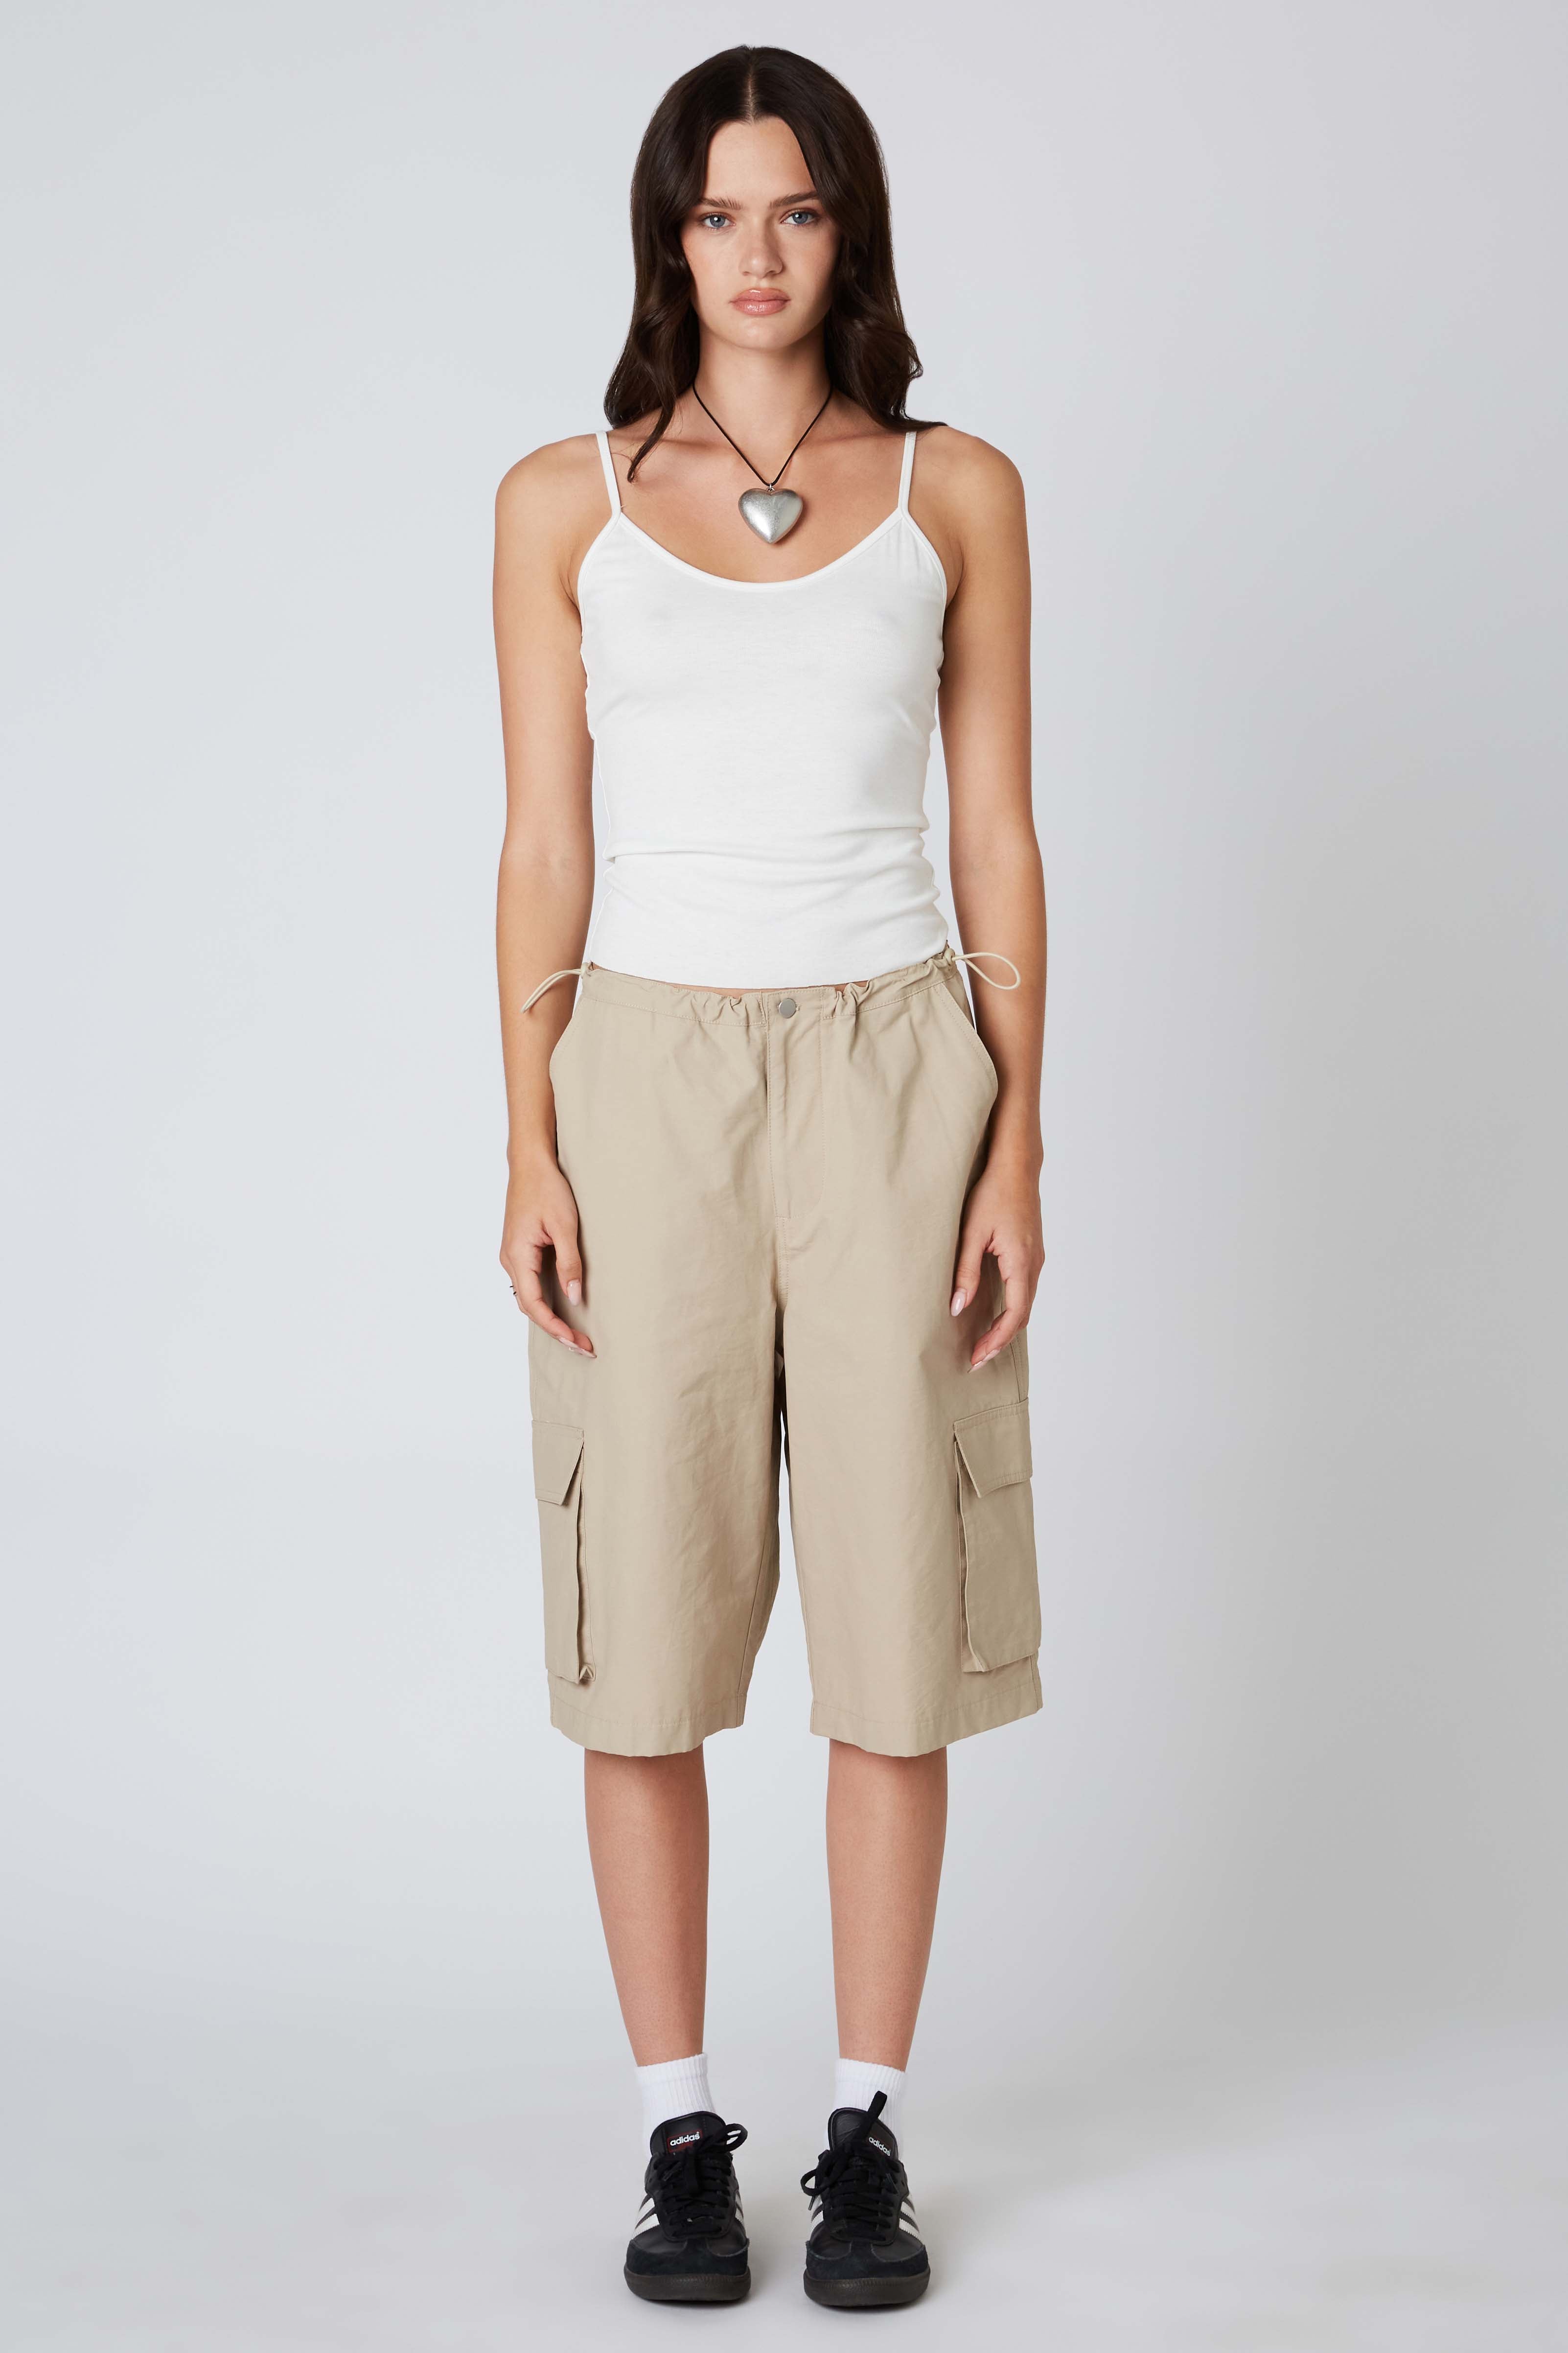 Cargo Shorts in Tan Front View